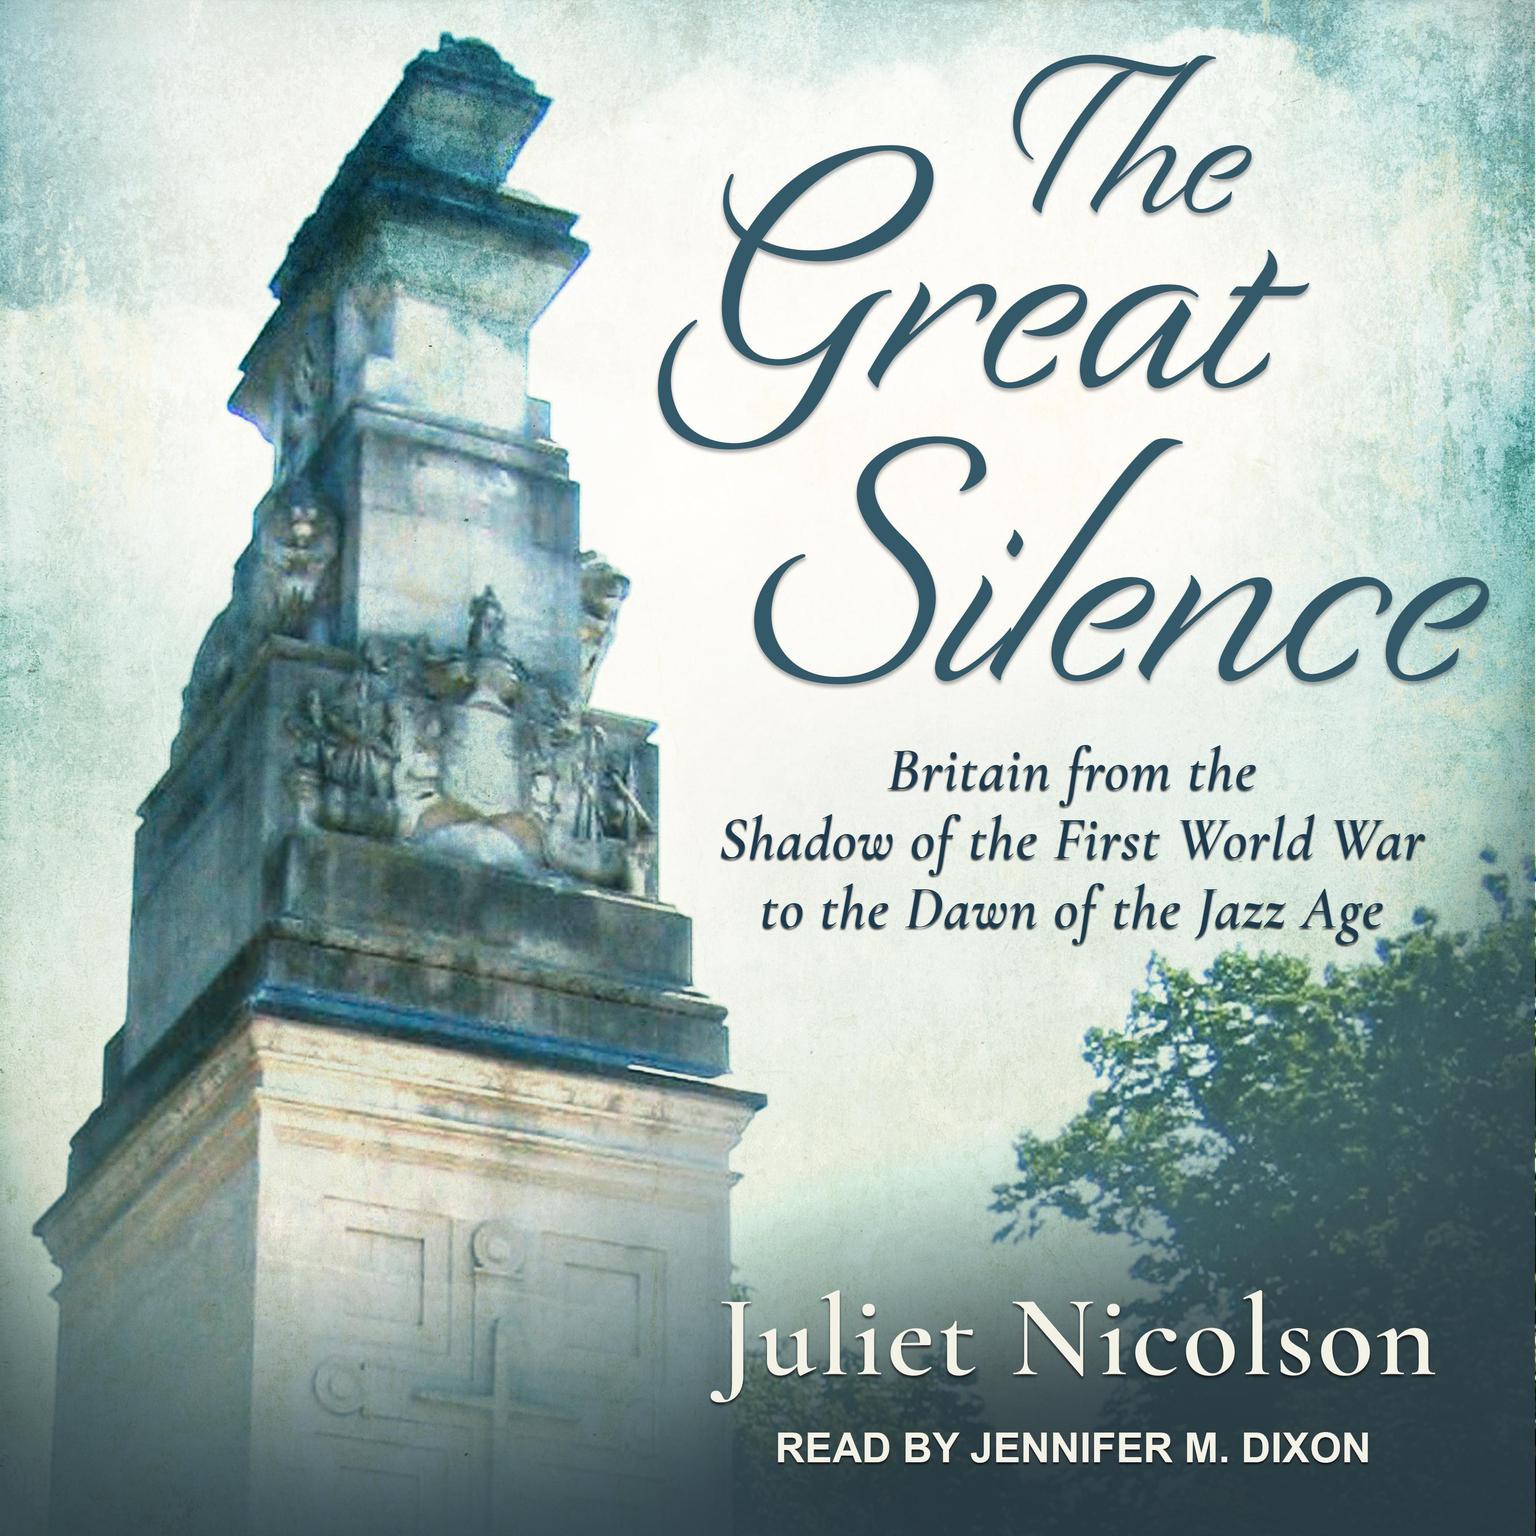 The Great Silence: Britain from the Shadow of the First World War to the Dawn of the Jazz Age Audiobook, by Juliet Nicolson